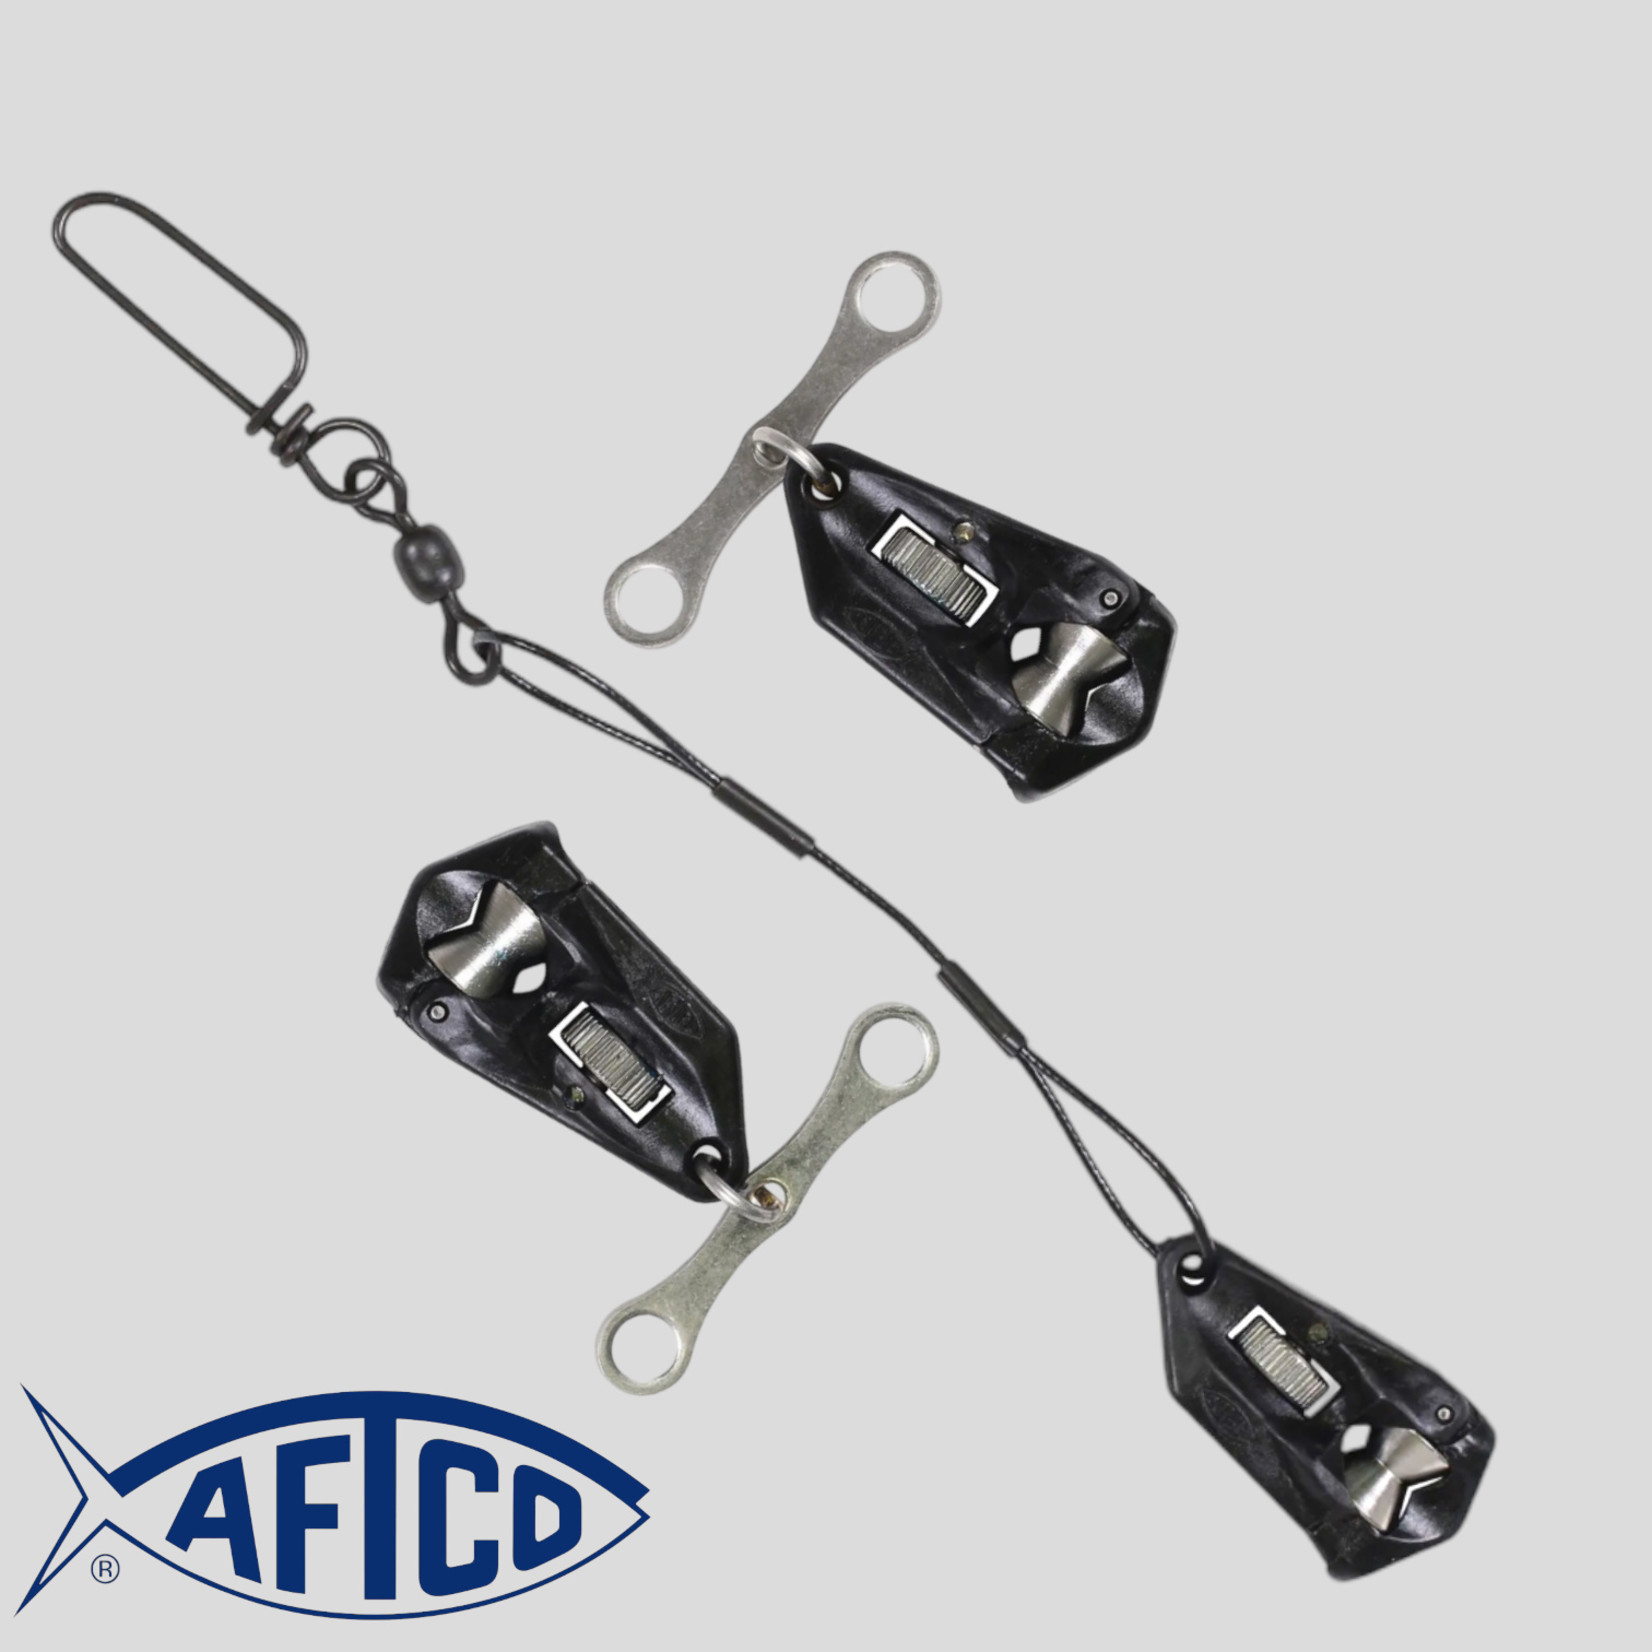 Aftco Roller Troller Release Clips - Tyalure Tackle